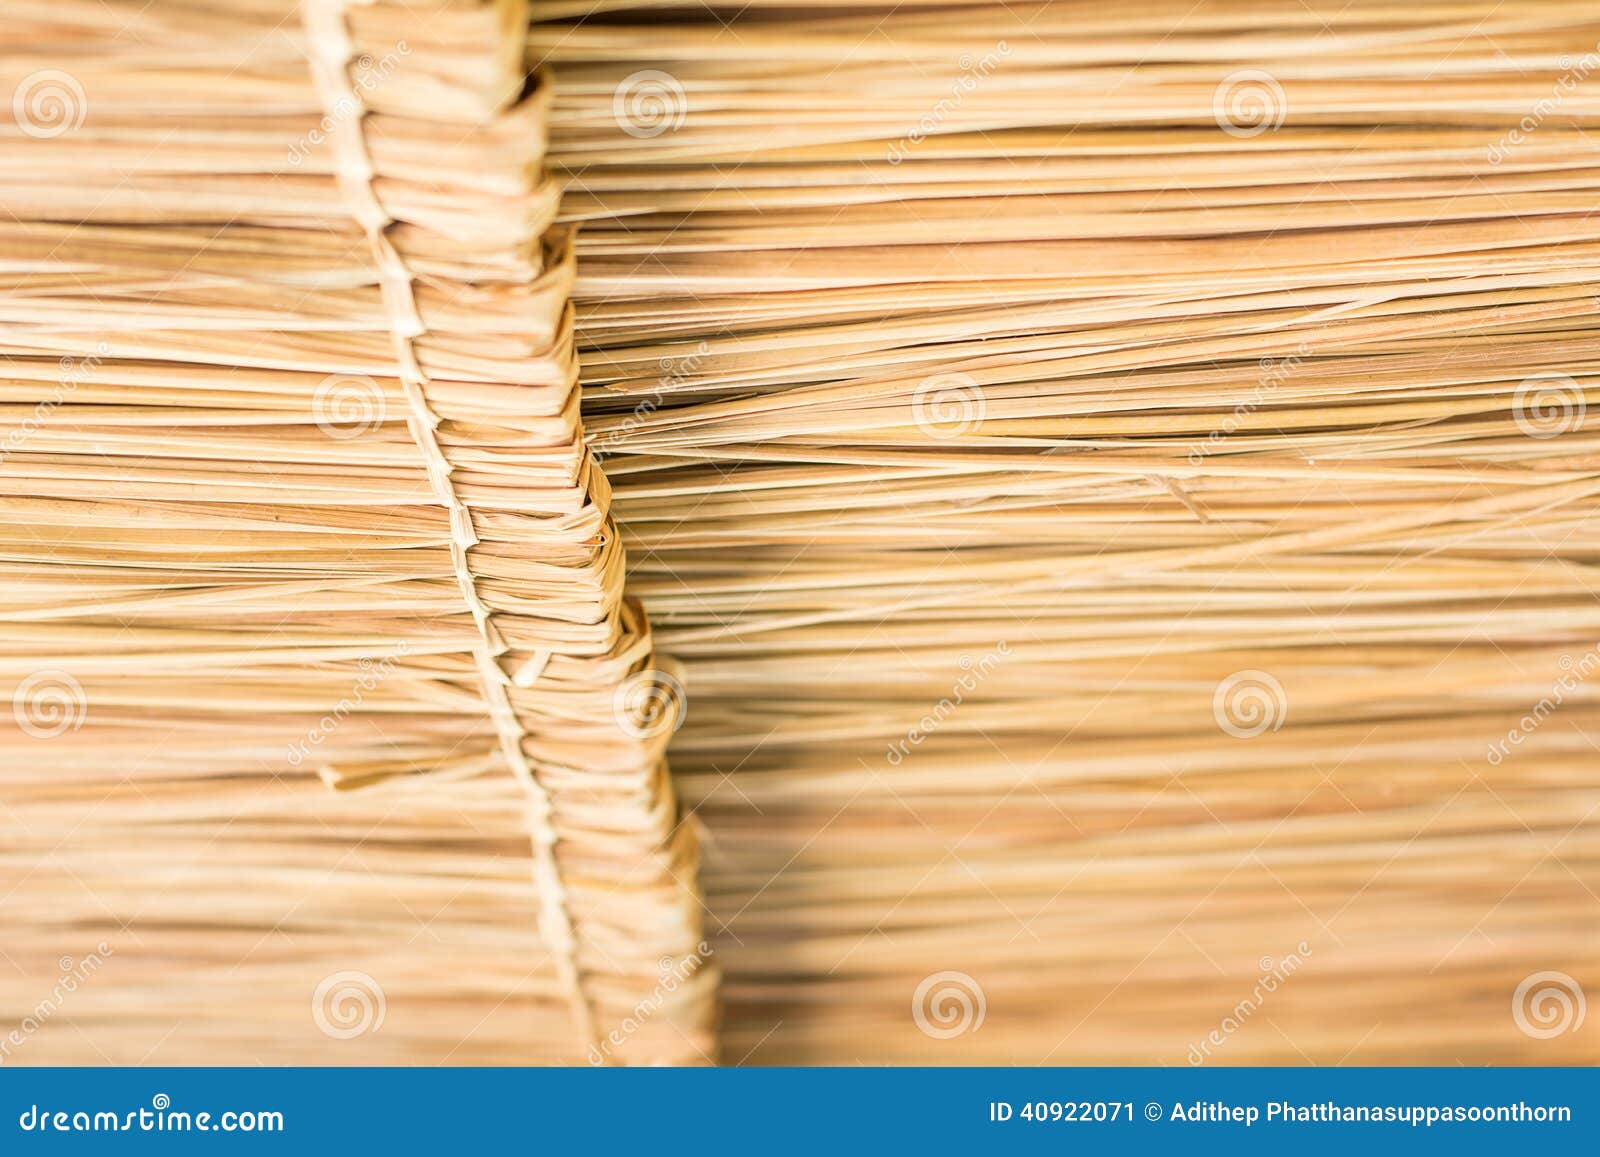 The Texture Of Thatched Roof At The Hut In The Countryside Stock Image